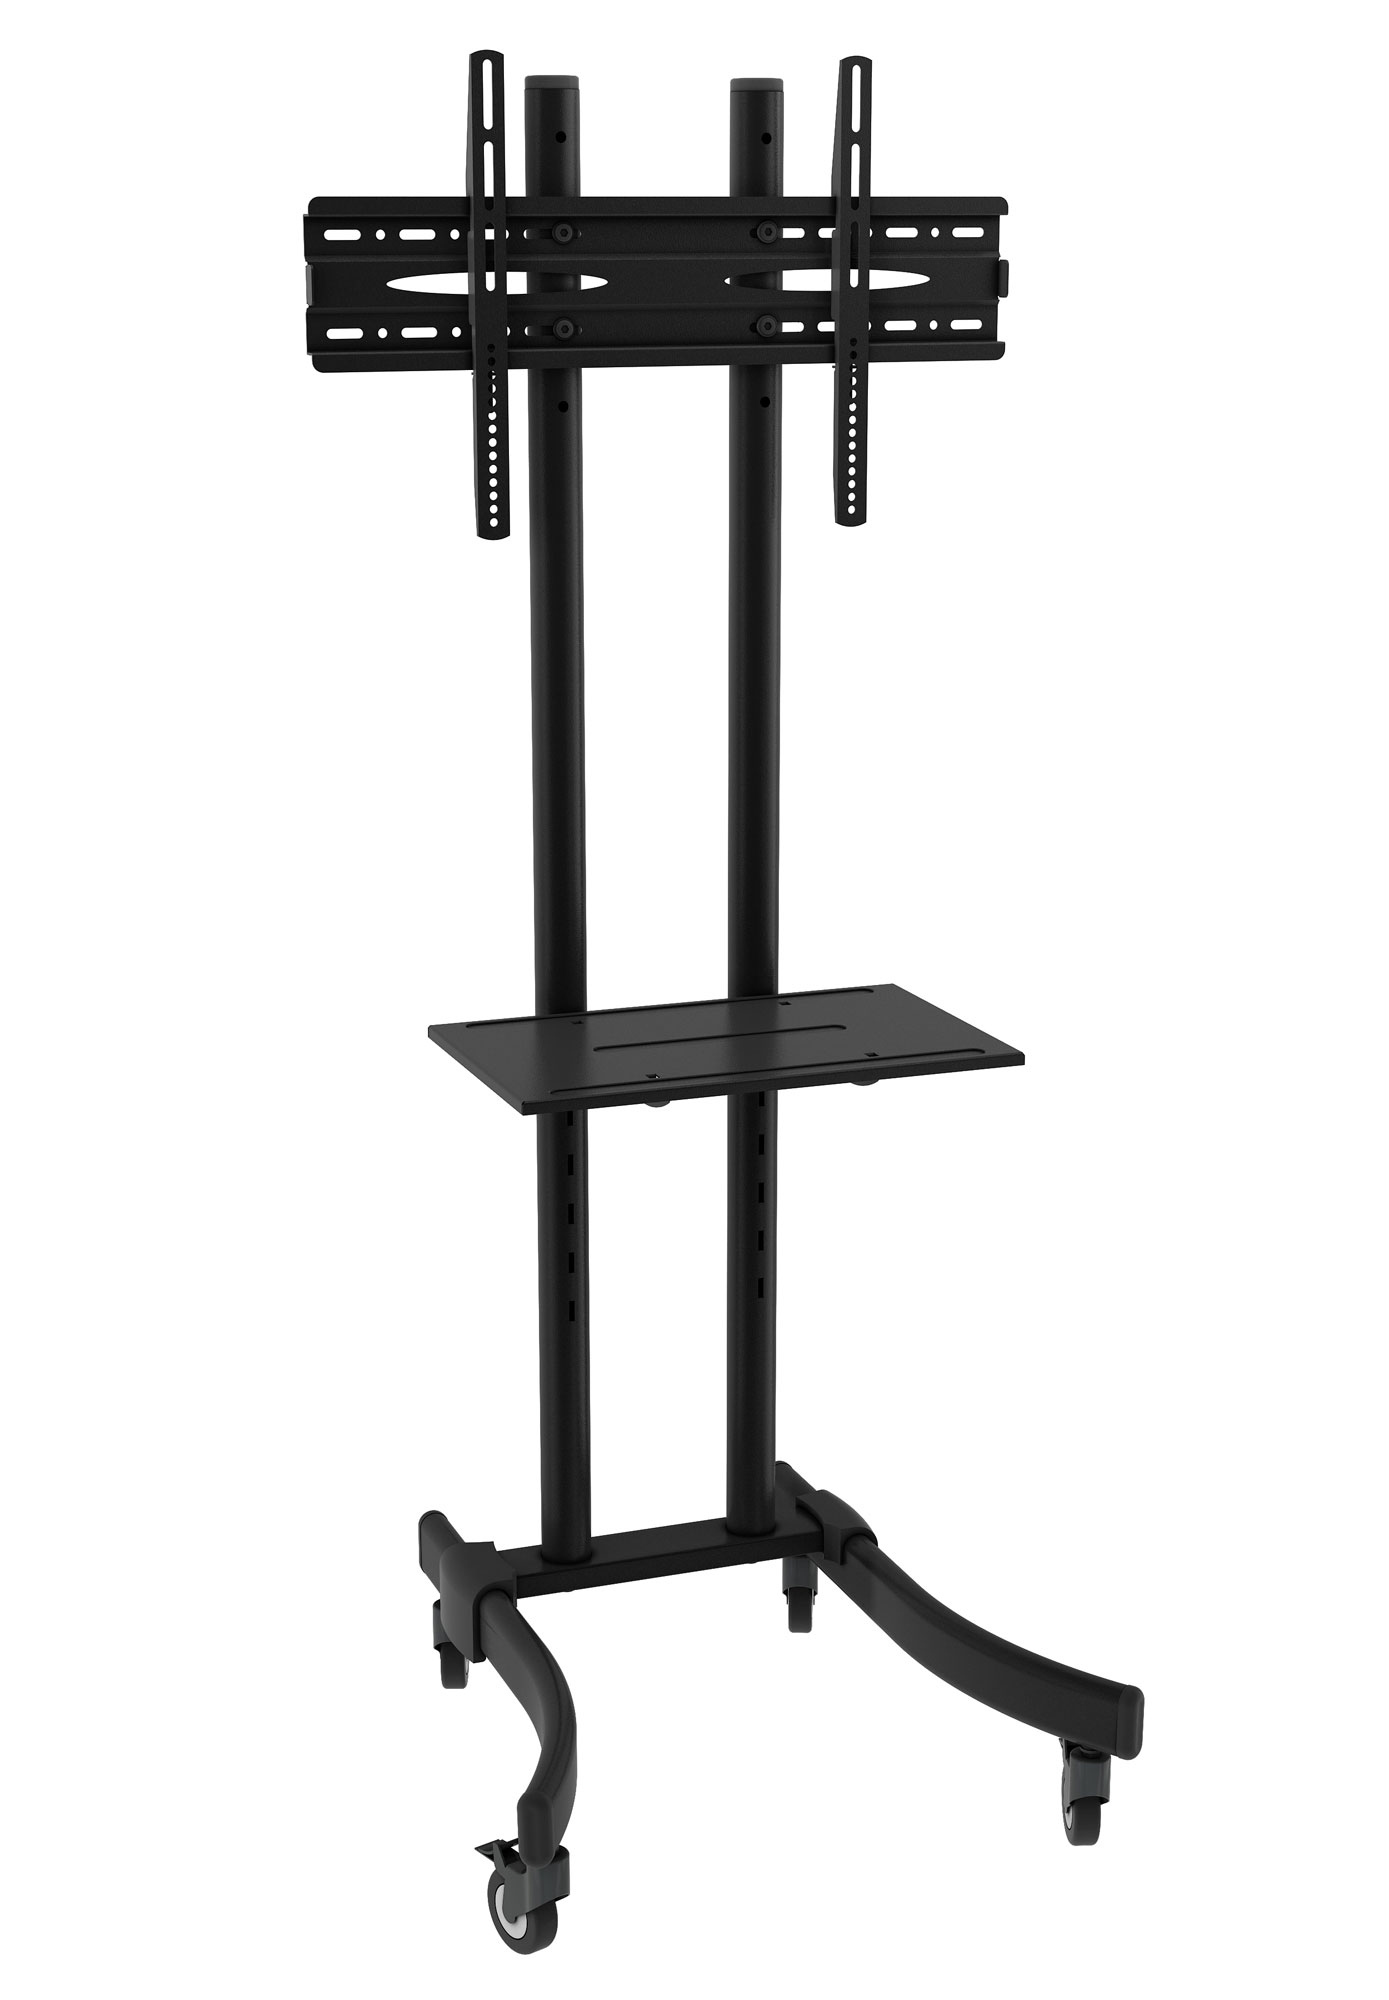 Mobile TV Stand Trolley Cart Mount Exhibition Display for 32"-65" Plasma/LCD/LED 